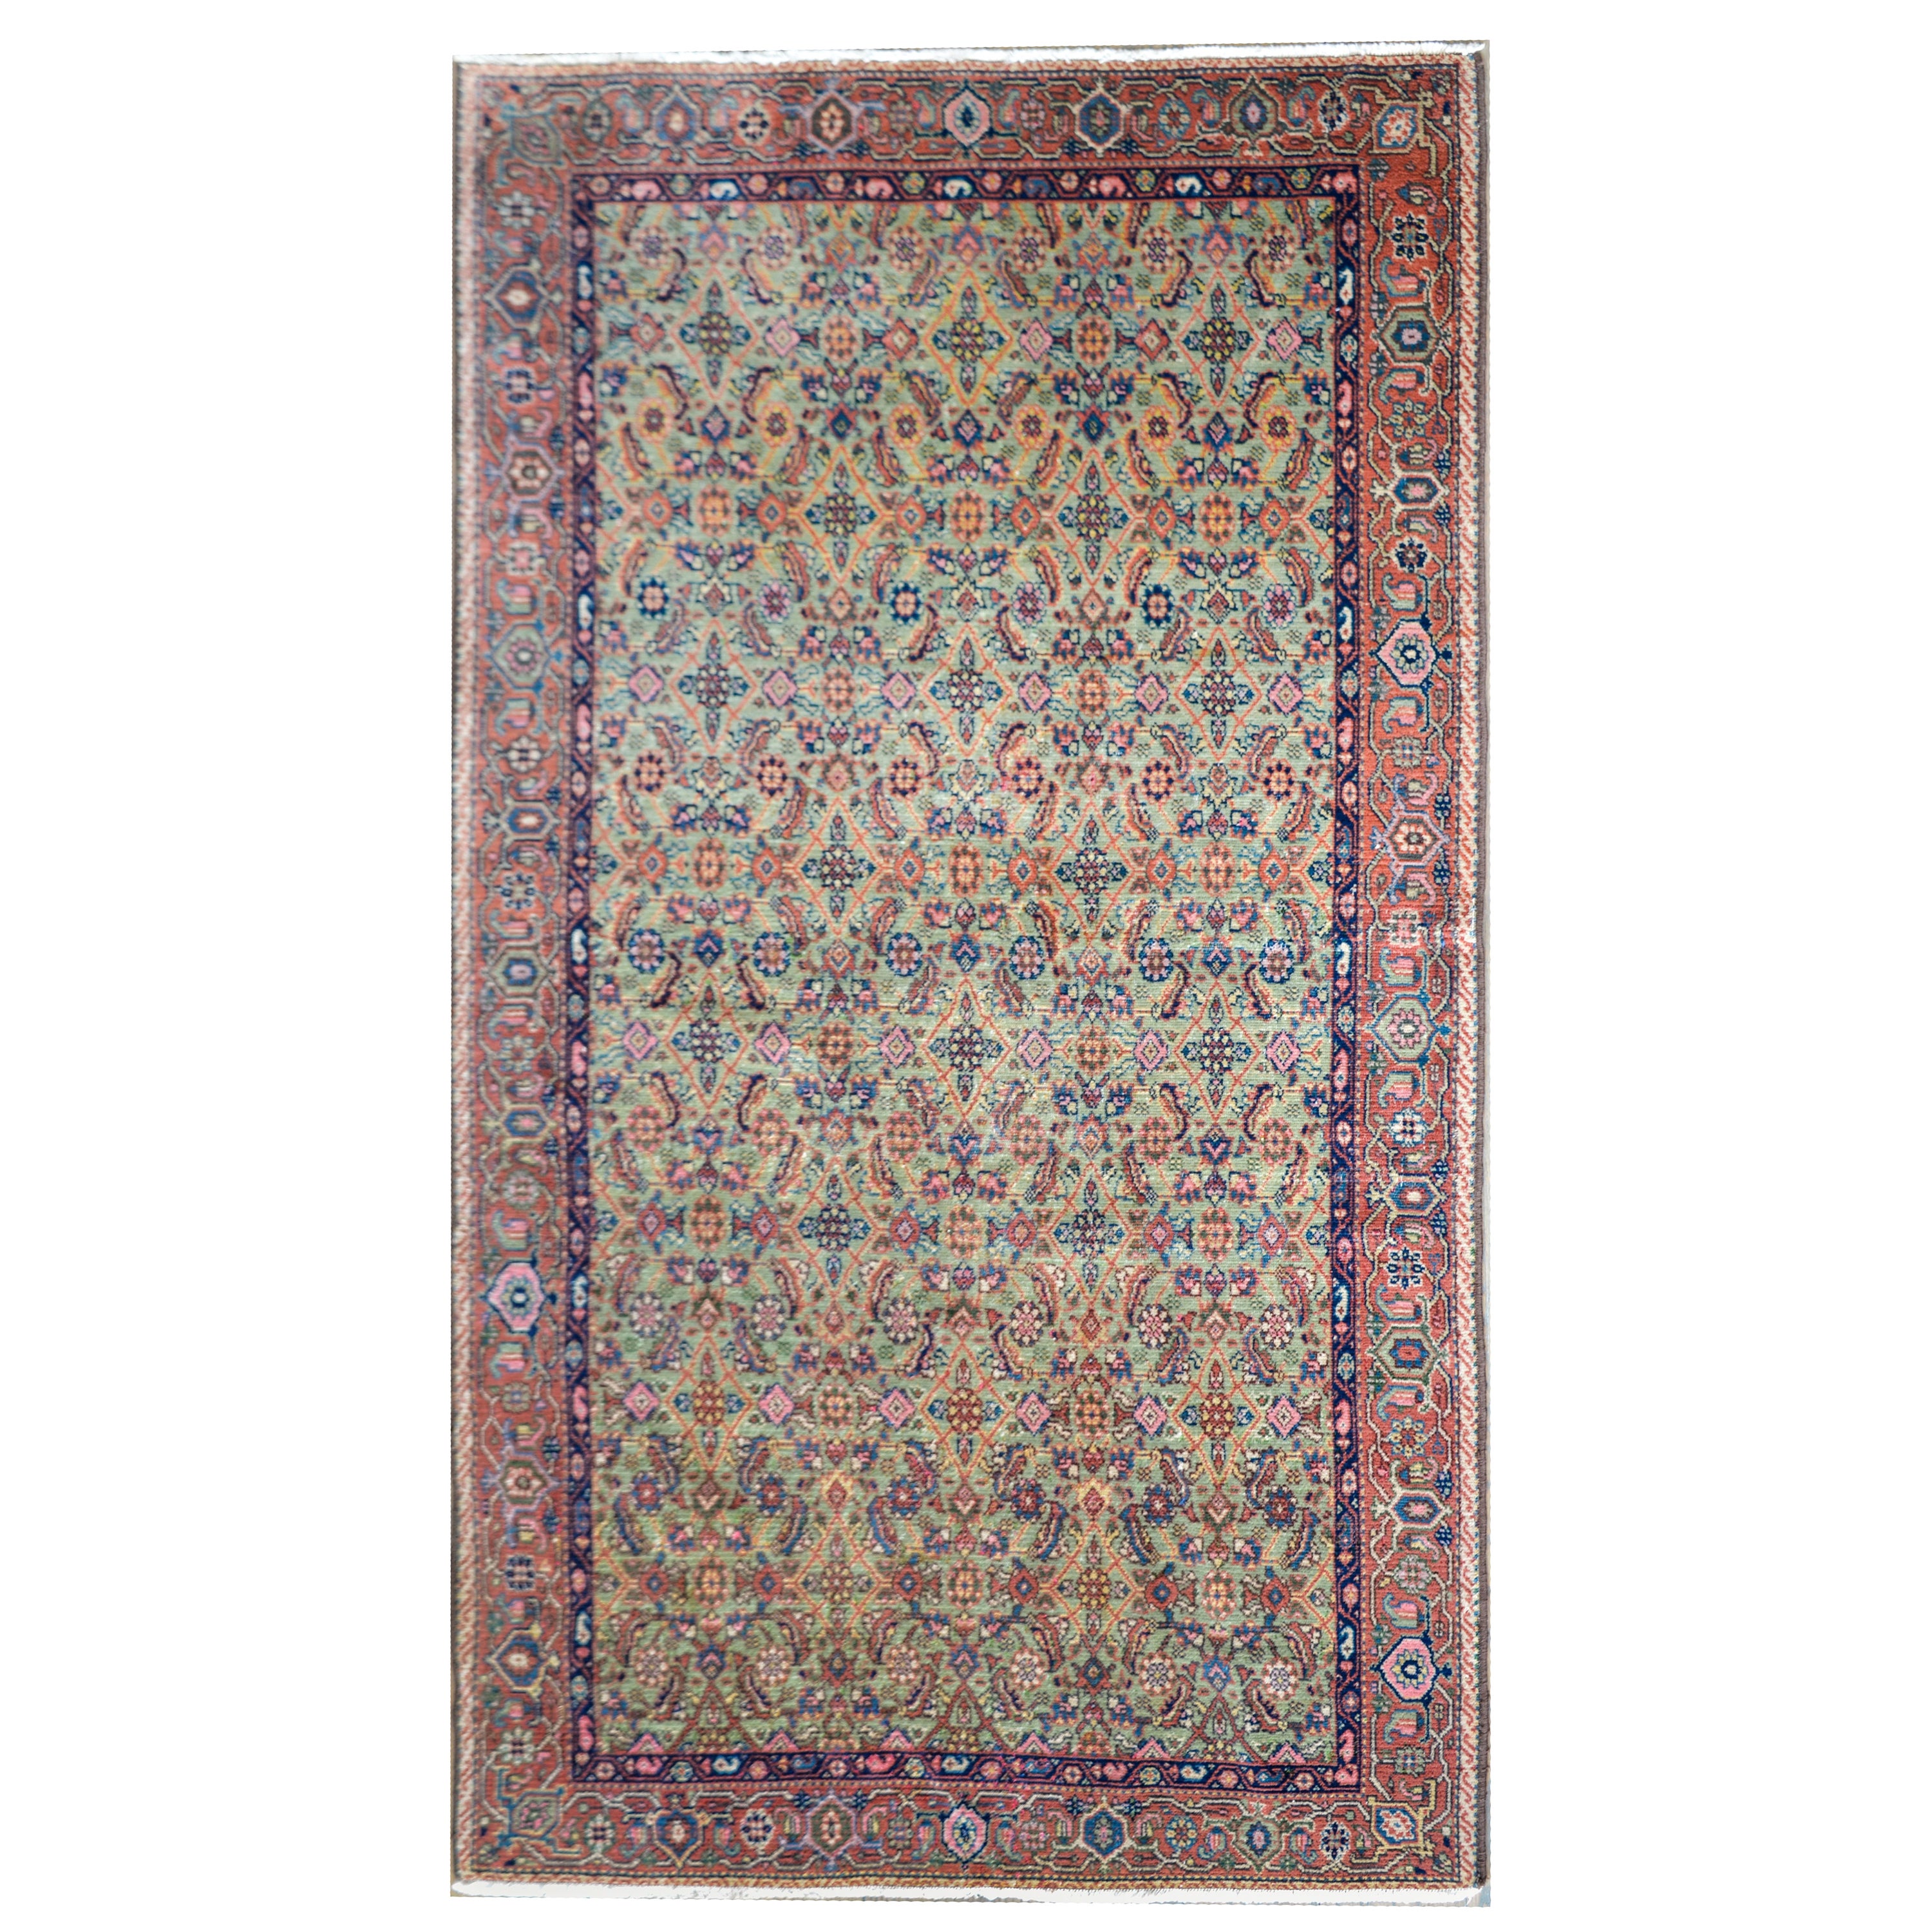 Early 20th Century Sultanabad Rug